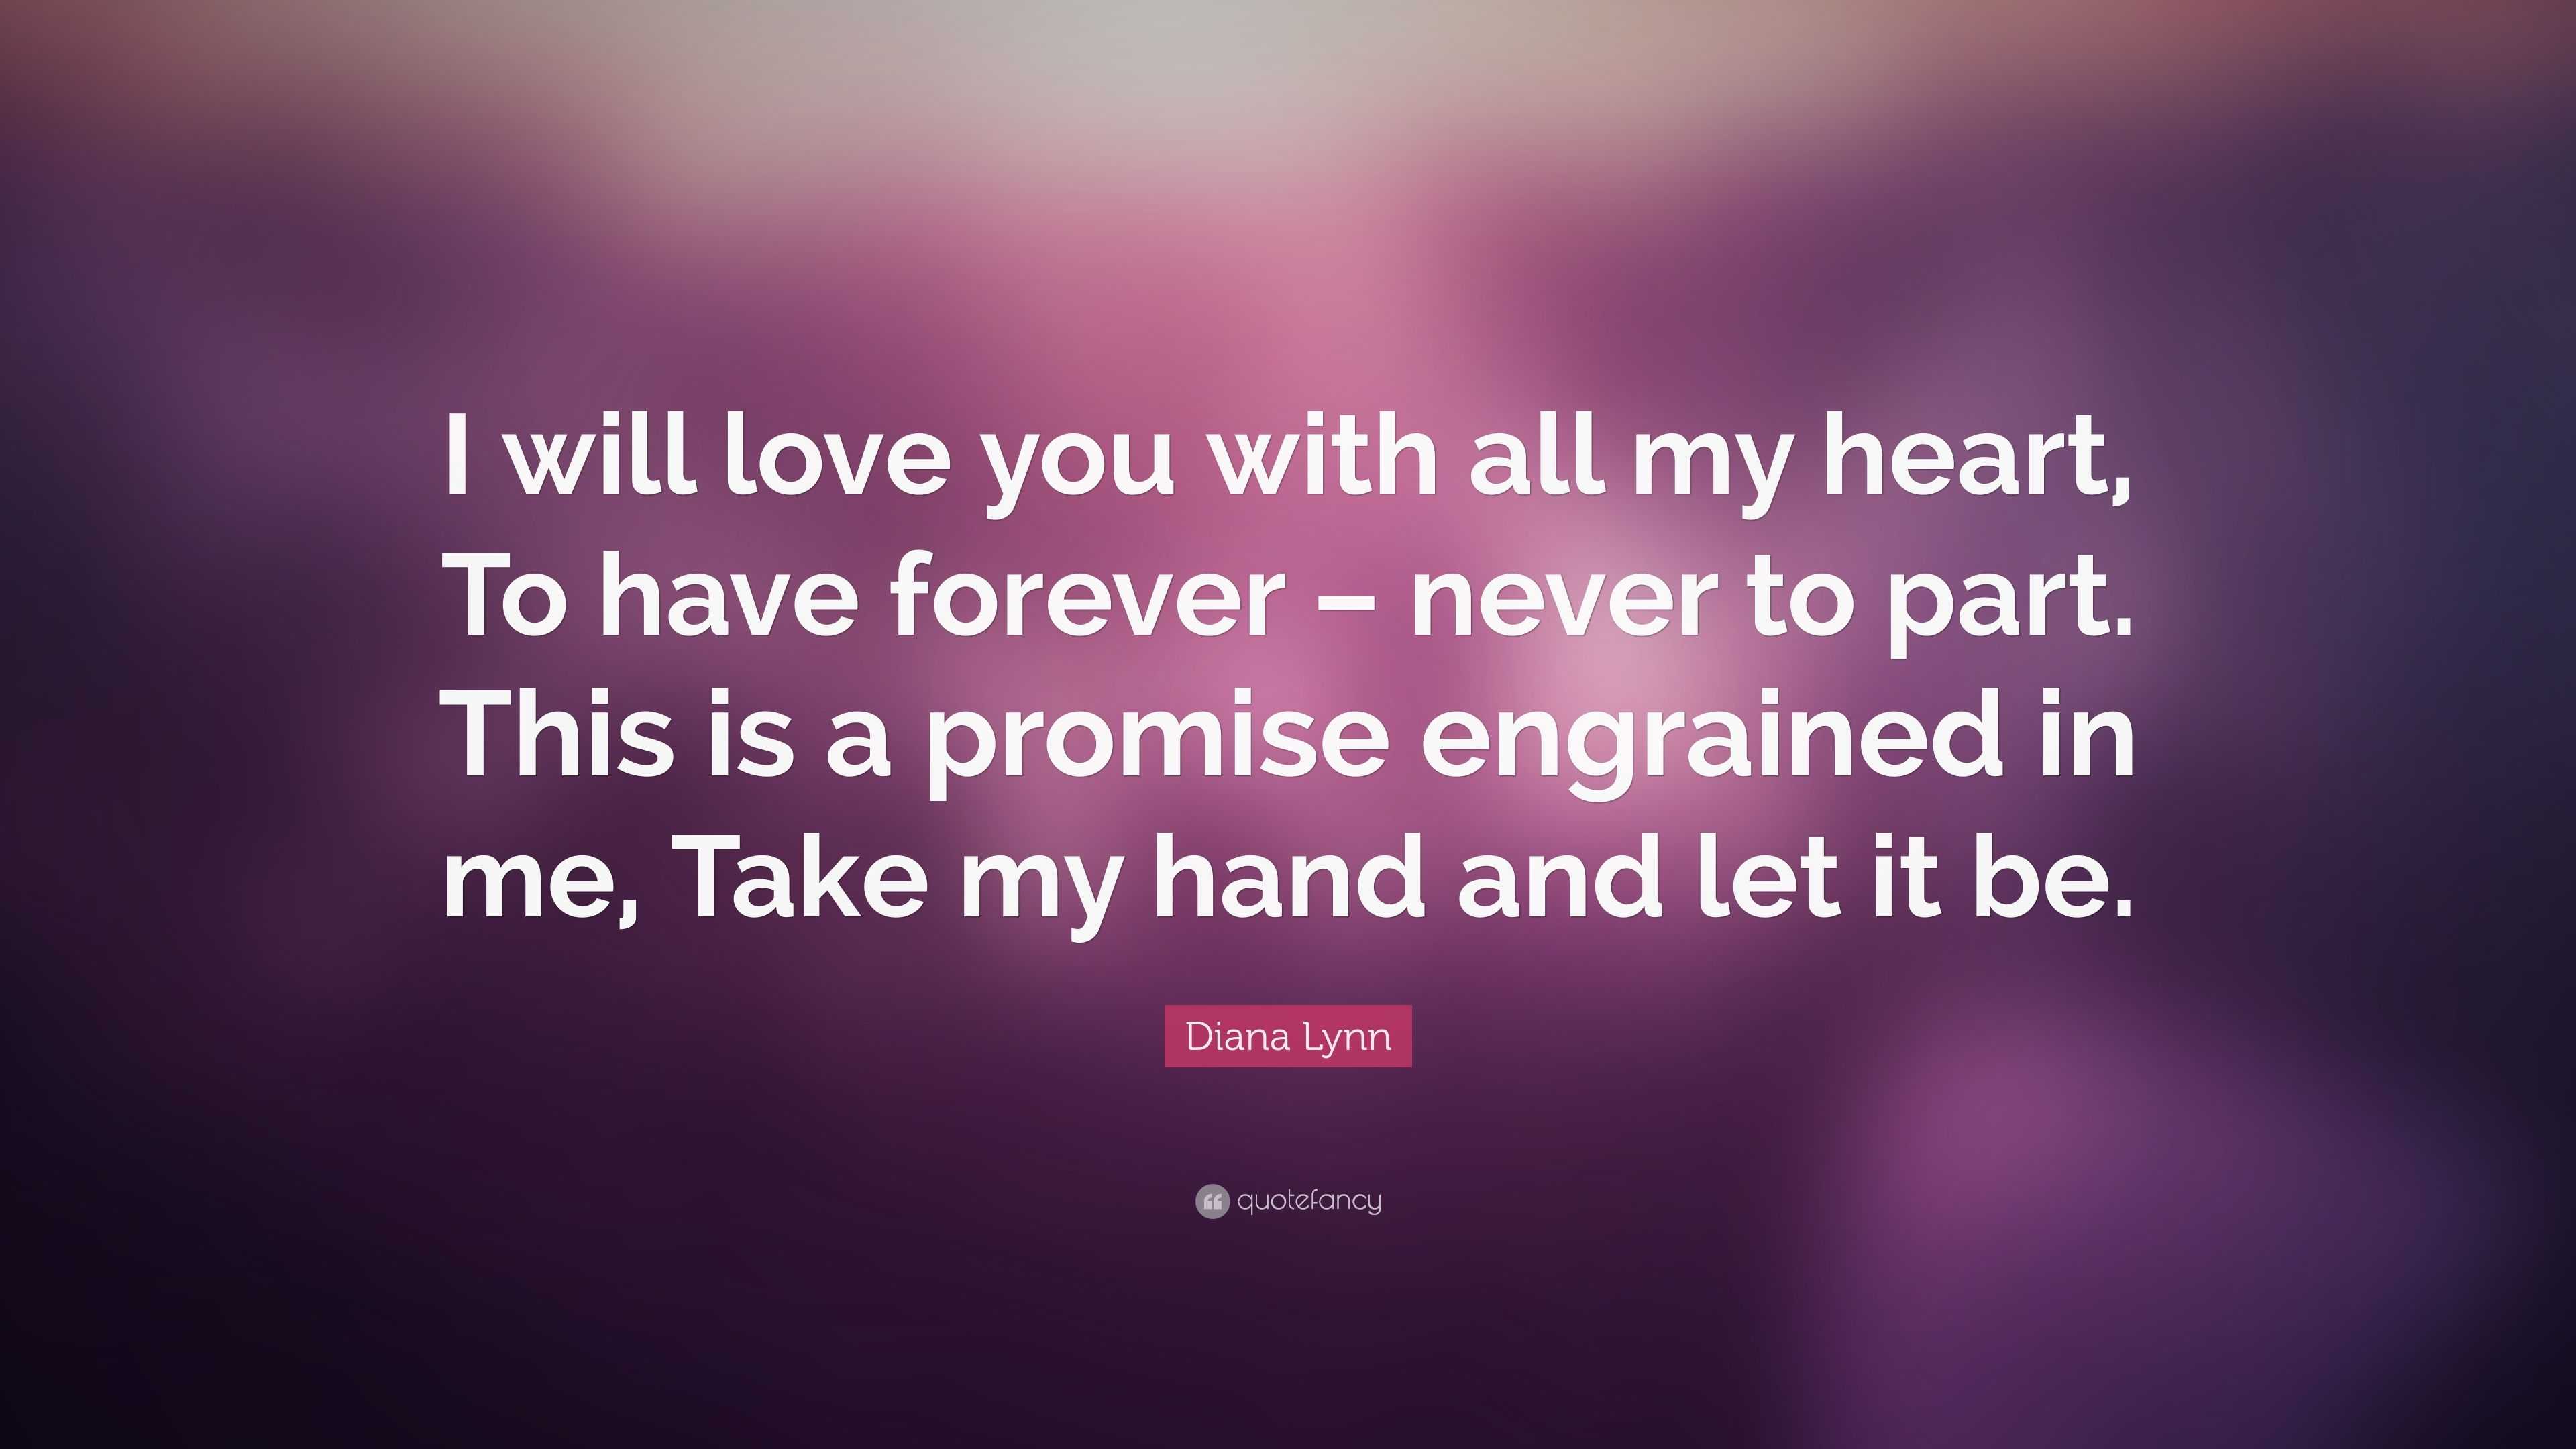 Diana Lynn Quote: “I will love you with all my heart, To have forever –  never to part. This is a promise engrained in me, Take my hand and ...”